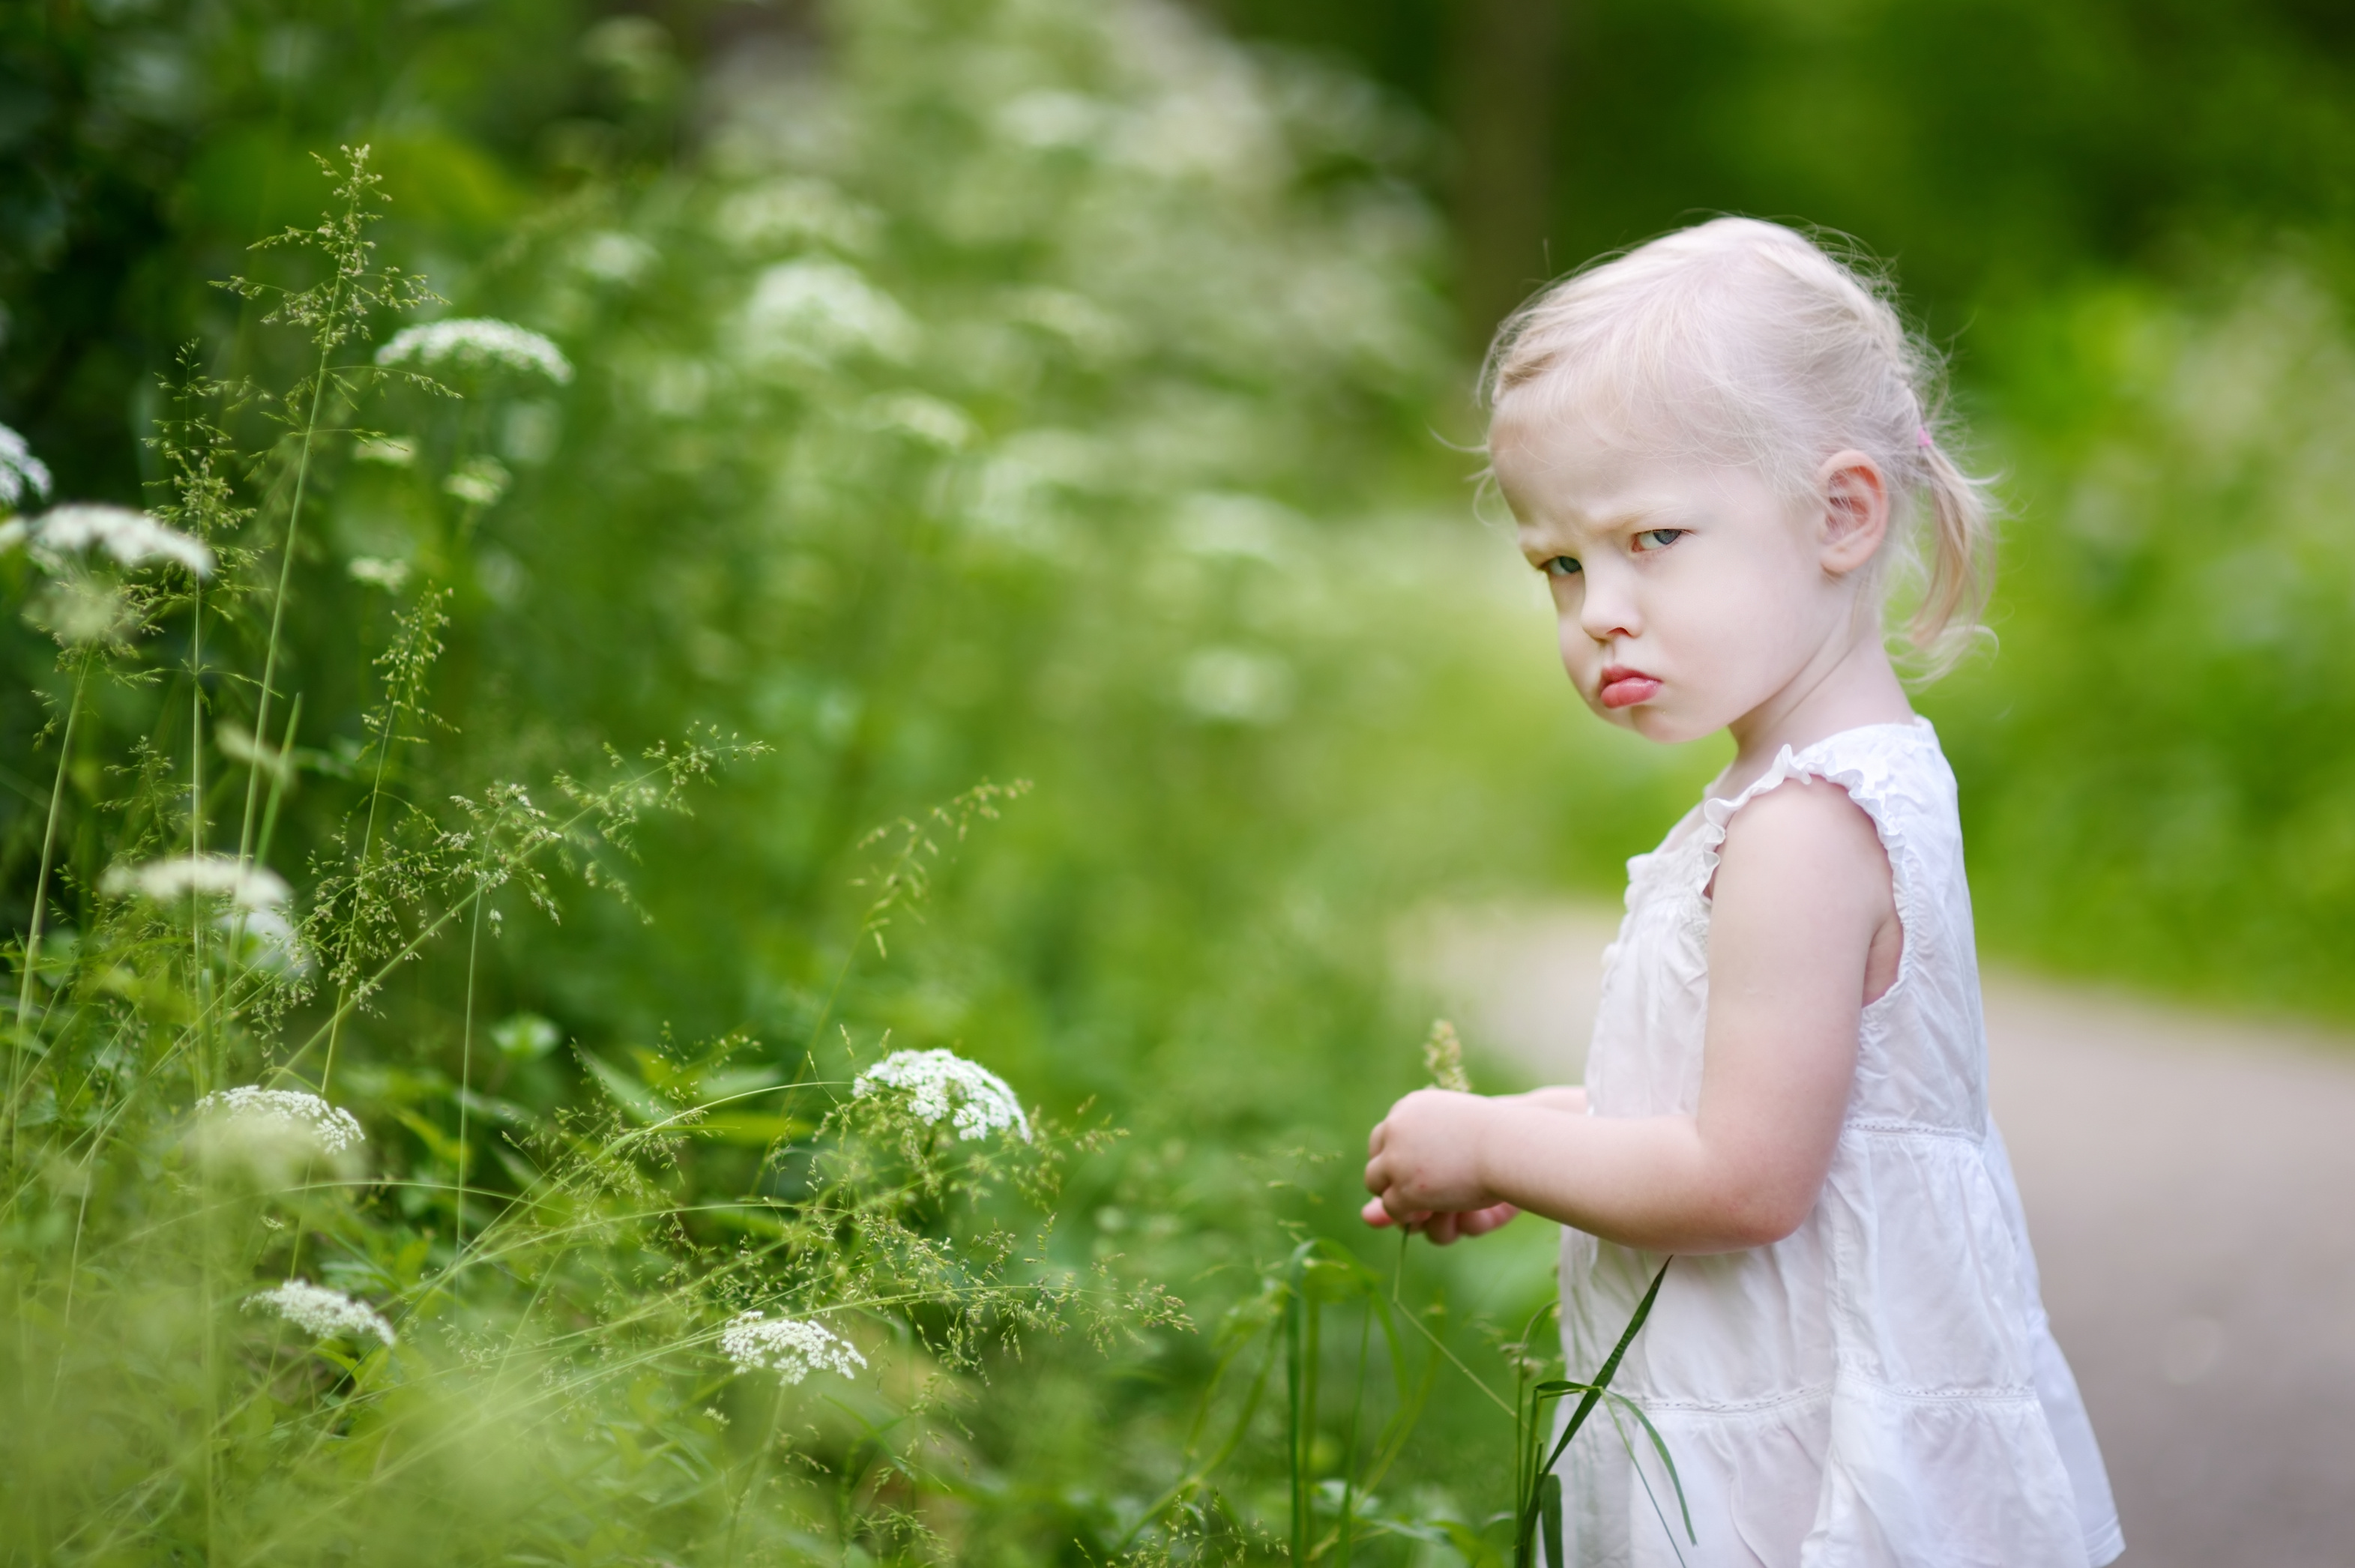 Tips and tricks for surviving toddler tantrums without losing control or being pulled into the emotion